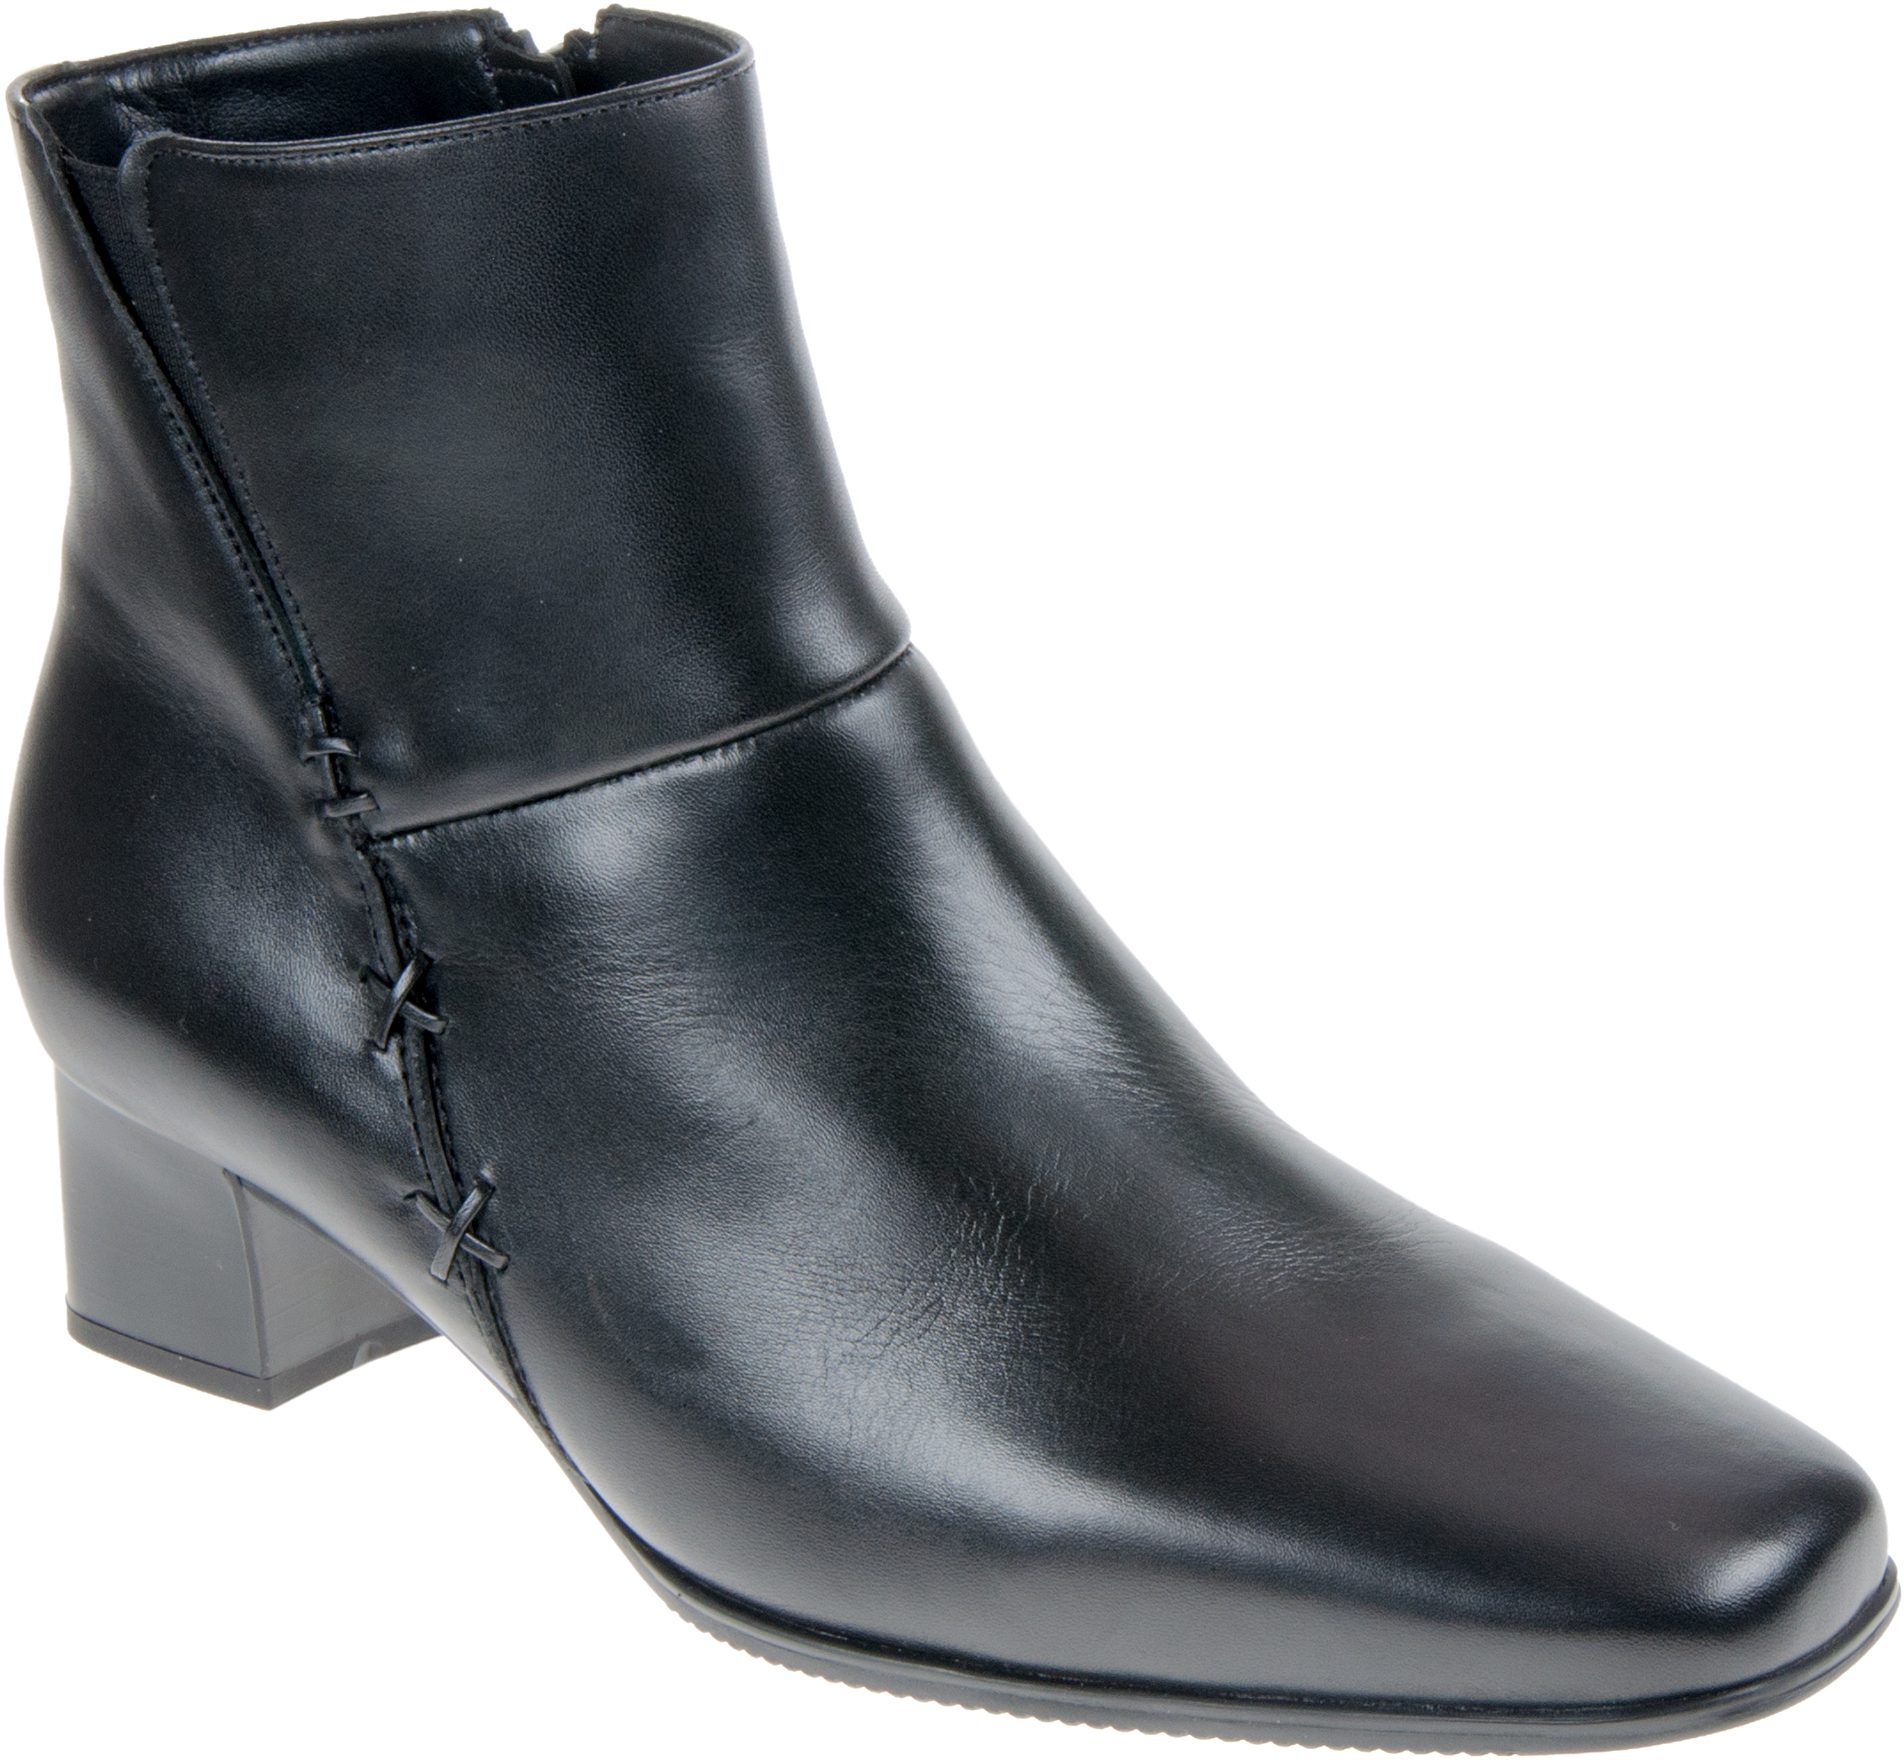 Gabor Bassanio Black Leather 76.620.51 Boots - Humphries Shoes